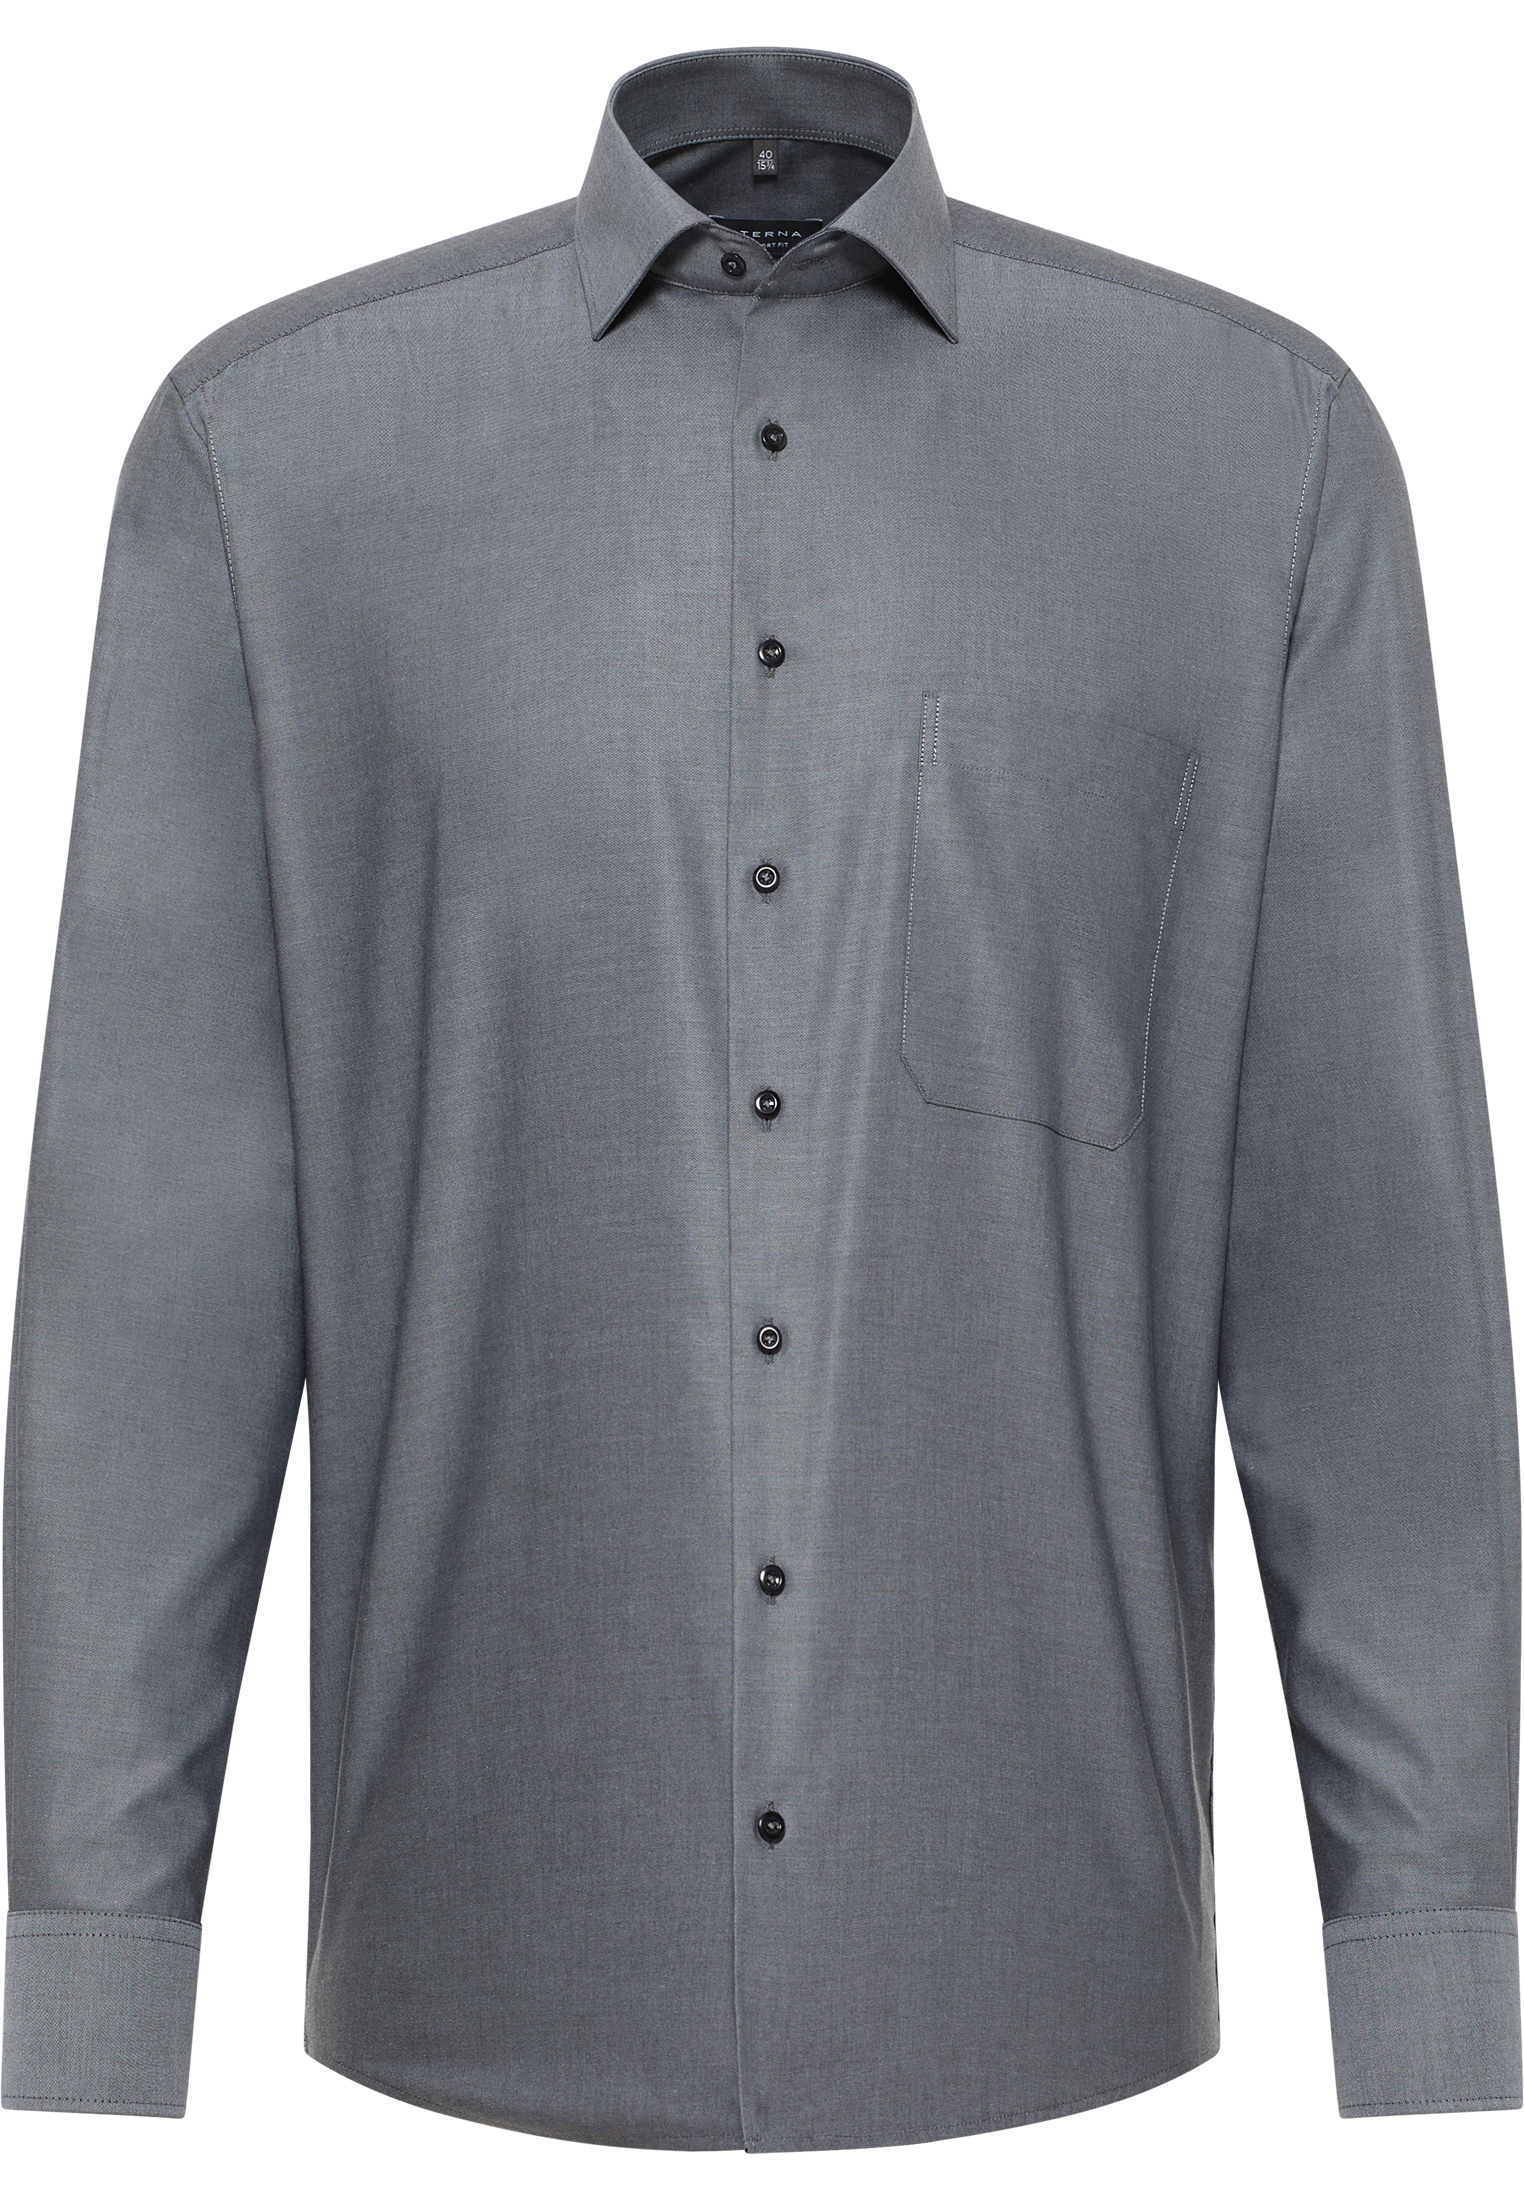 COMFORT FIT Shirt in anthracite plain